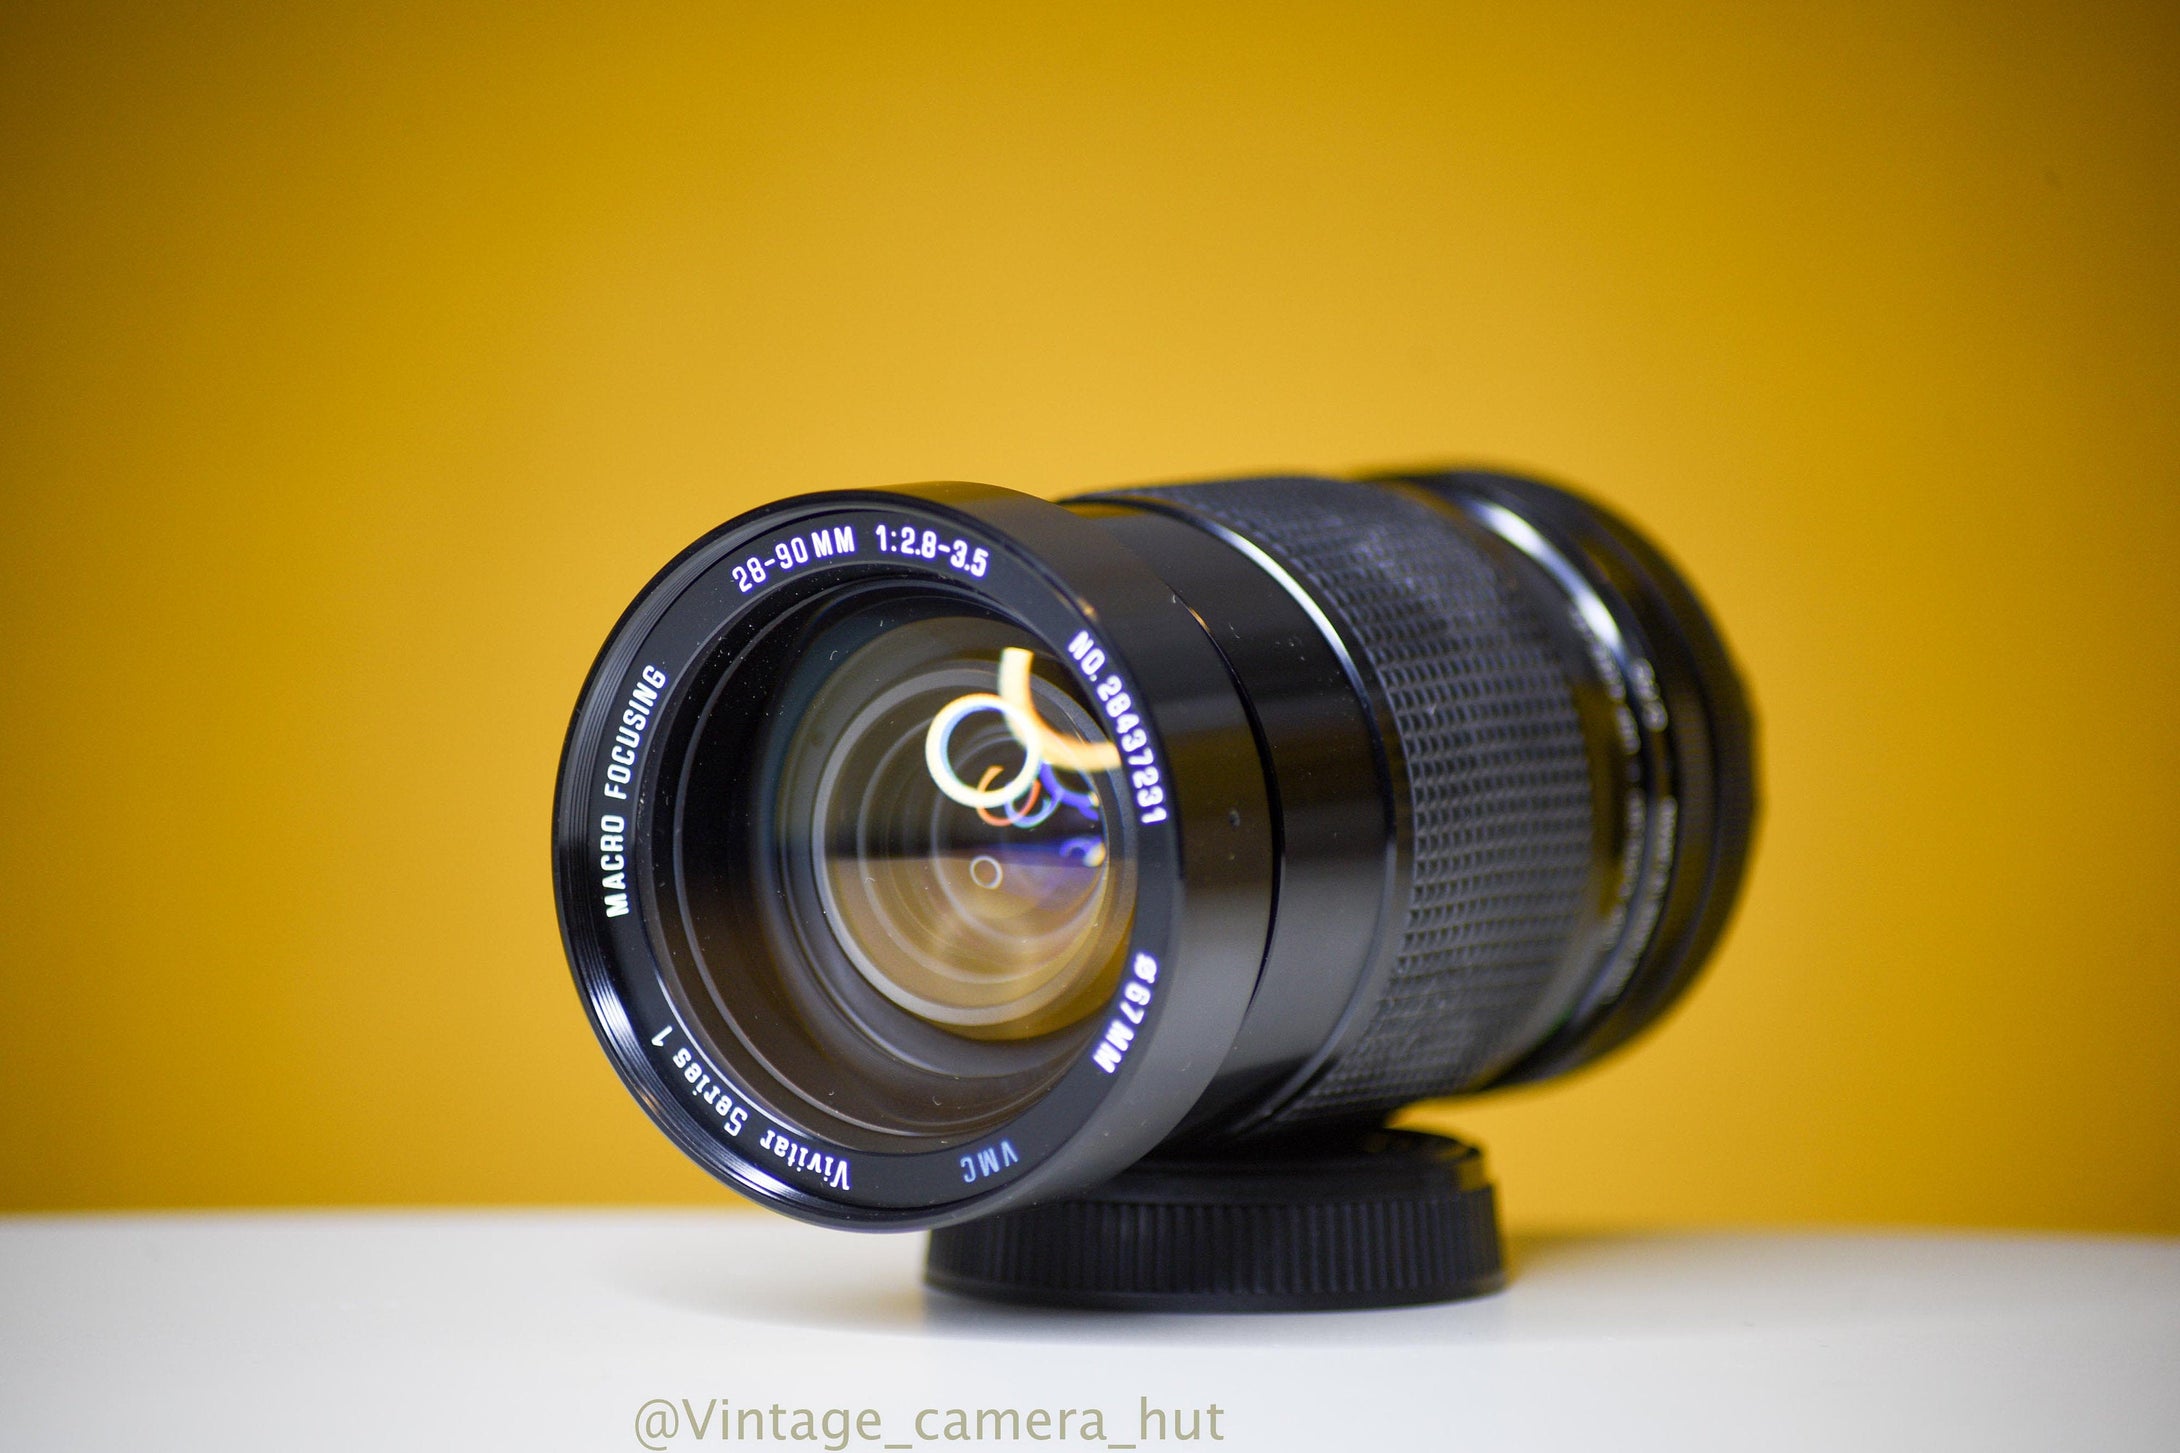 Vivitar Series 1 28-90mm f/2.8 Lens for Minolta Mount Camera Mint Condition with Box and Lens Cap